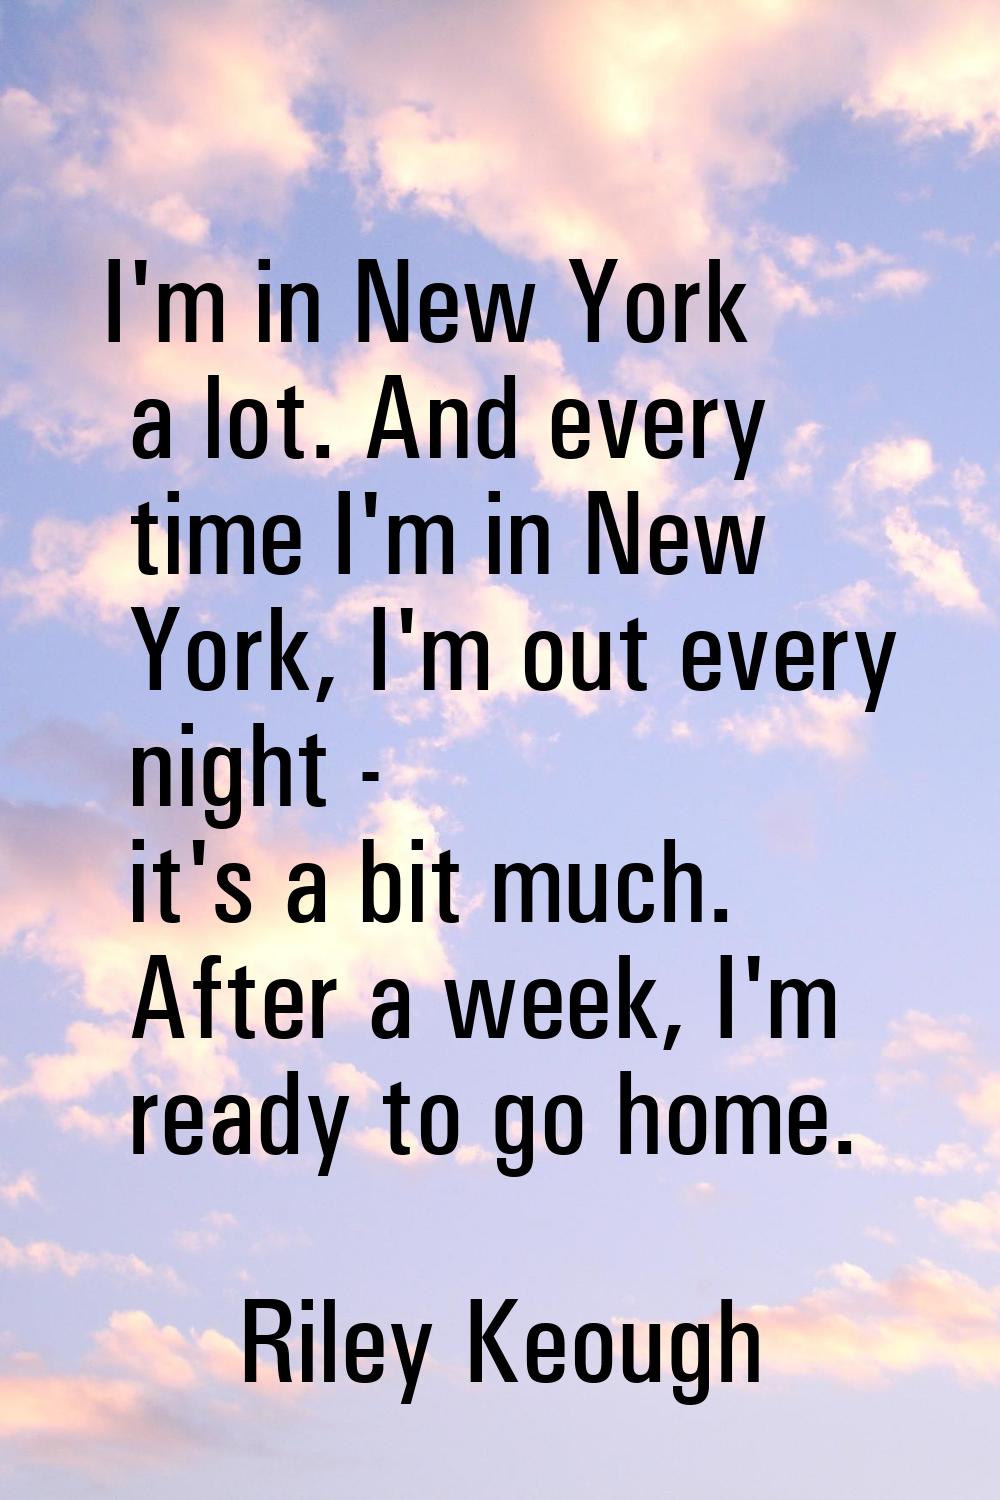 I'm in New York a lot. And every time I'm in New York, I'm out every night - it's a bit much. After